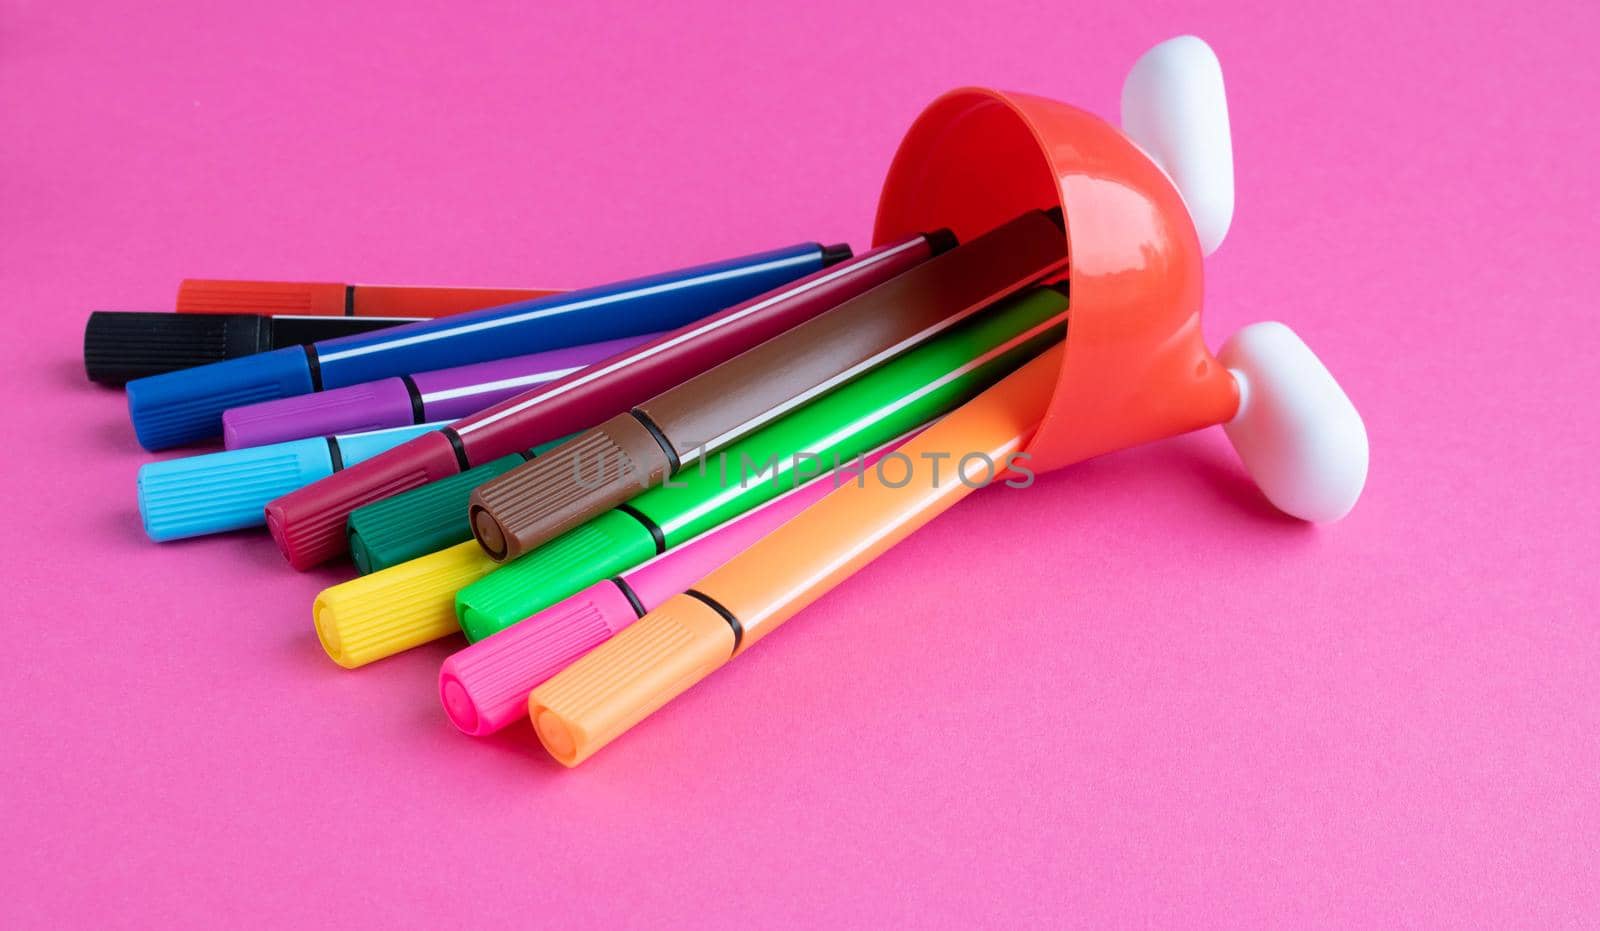 Fallen colored markers and a red stand with white legs isolated on a pink background. by lapushka62